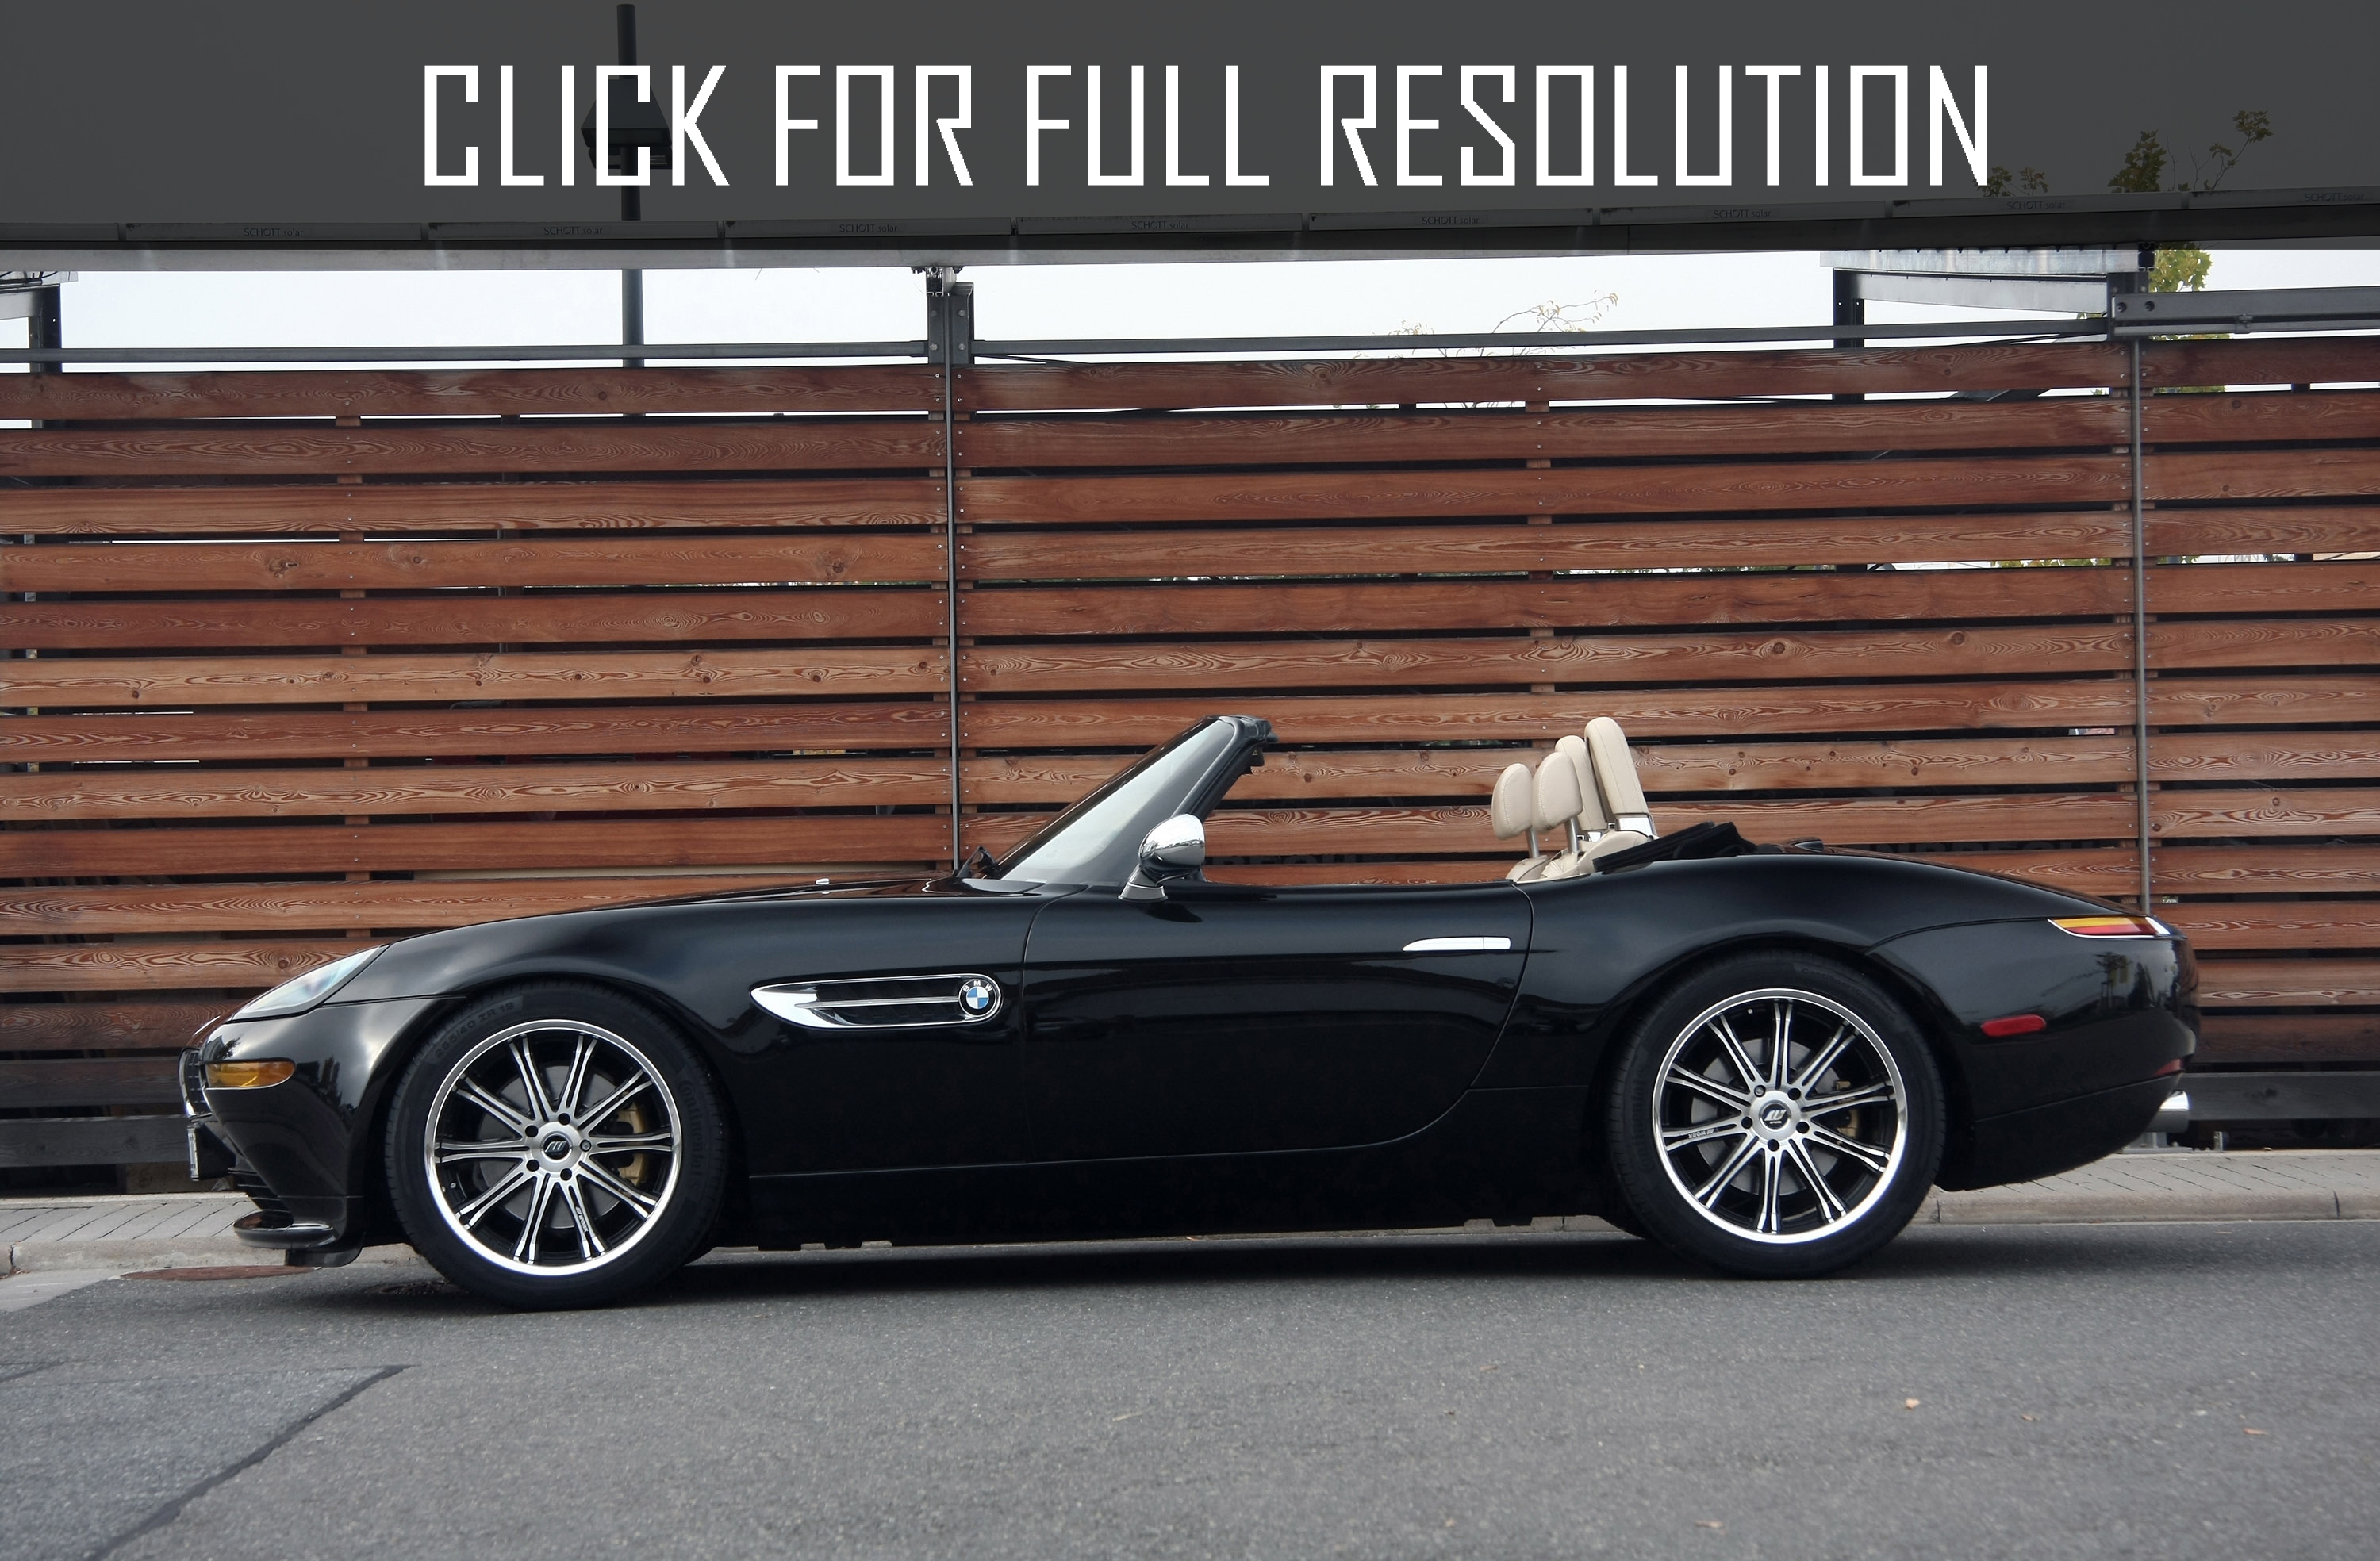 gewoon Passief vervagen 2015 Bmw Z8 - news, reviews, msrp, ratings with amazing images